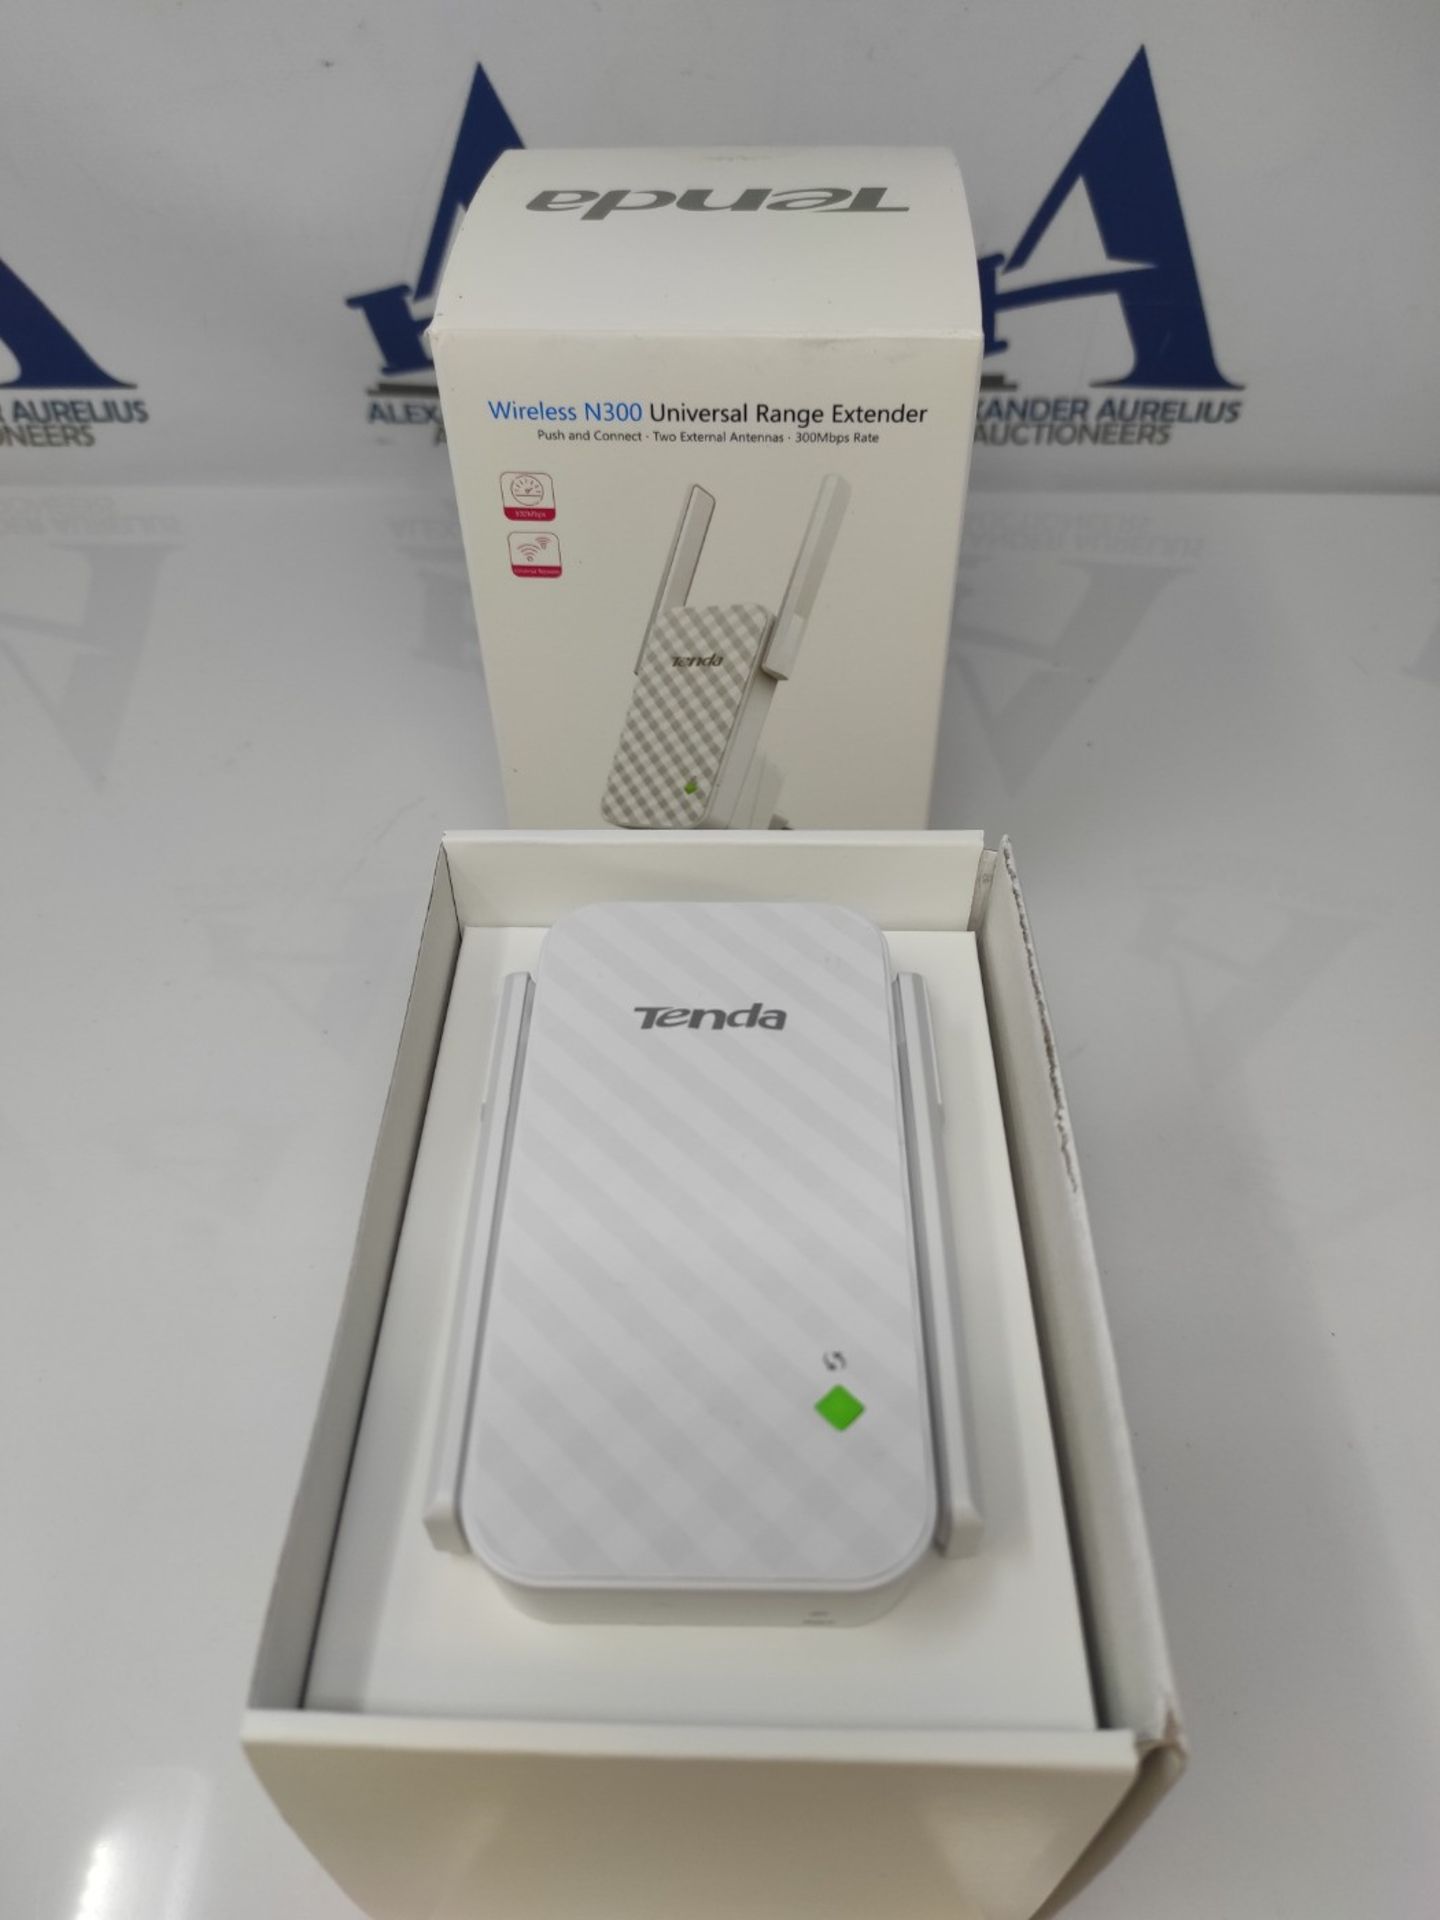 Tenda WLAN Repeater WLAN Amplifier WiFi Repeater (N300 2.4GHz: 300 Mbps), 2 * 3dBi Ext - Image 2 of 3